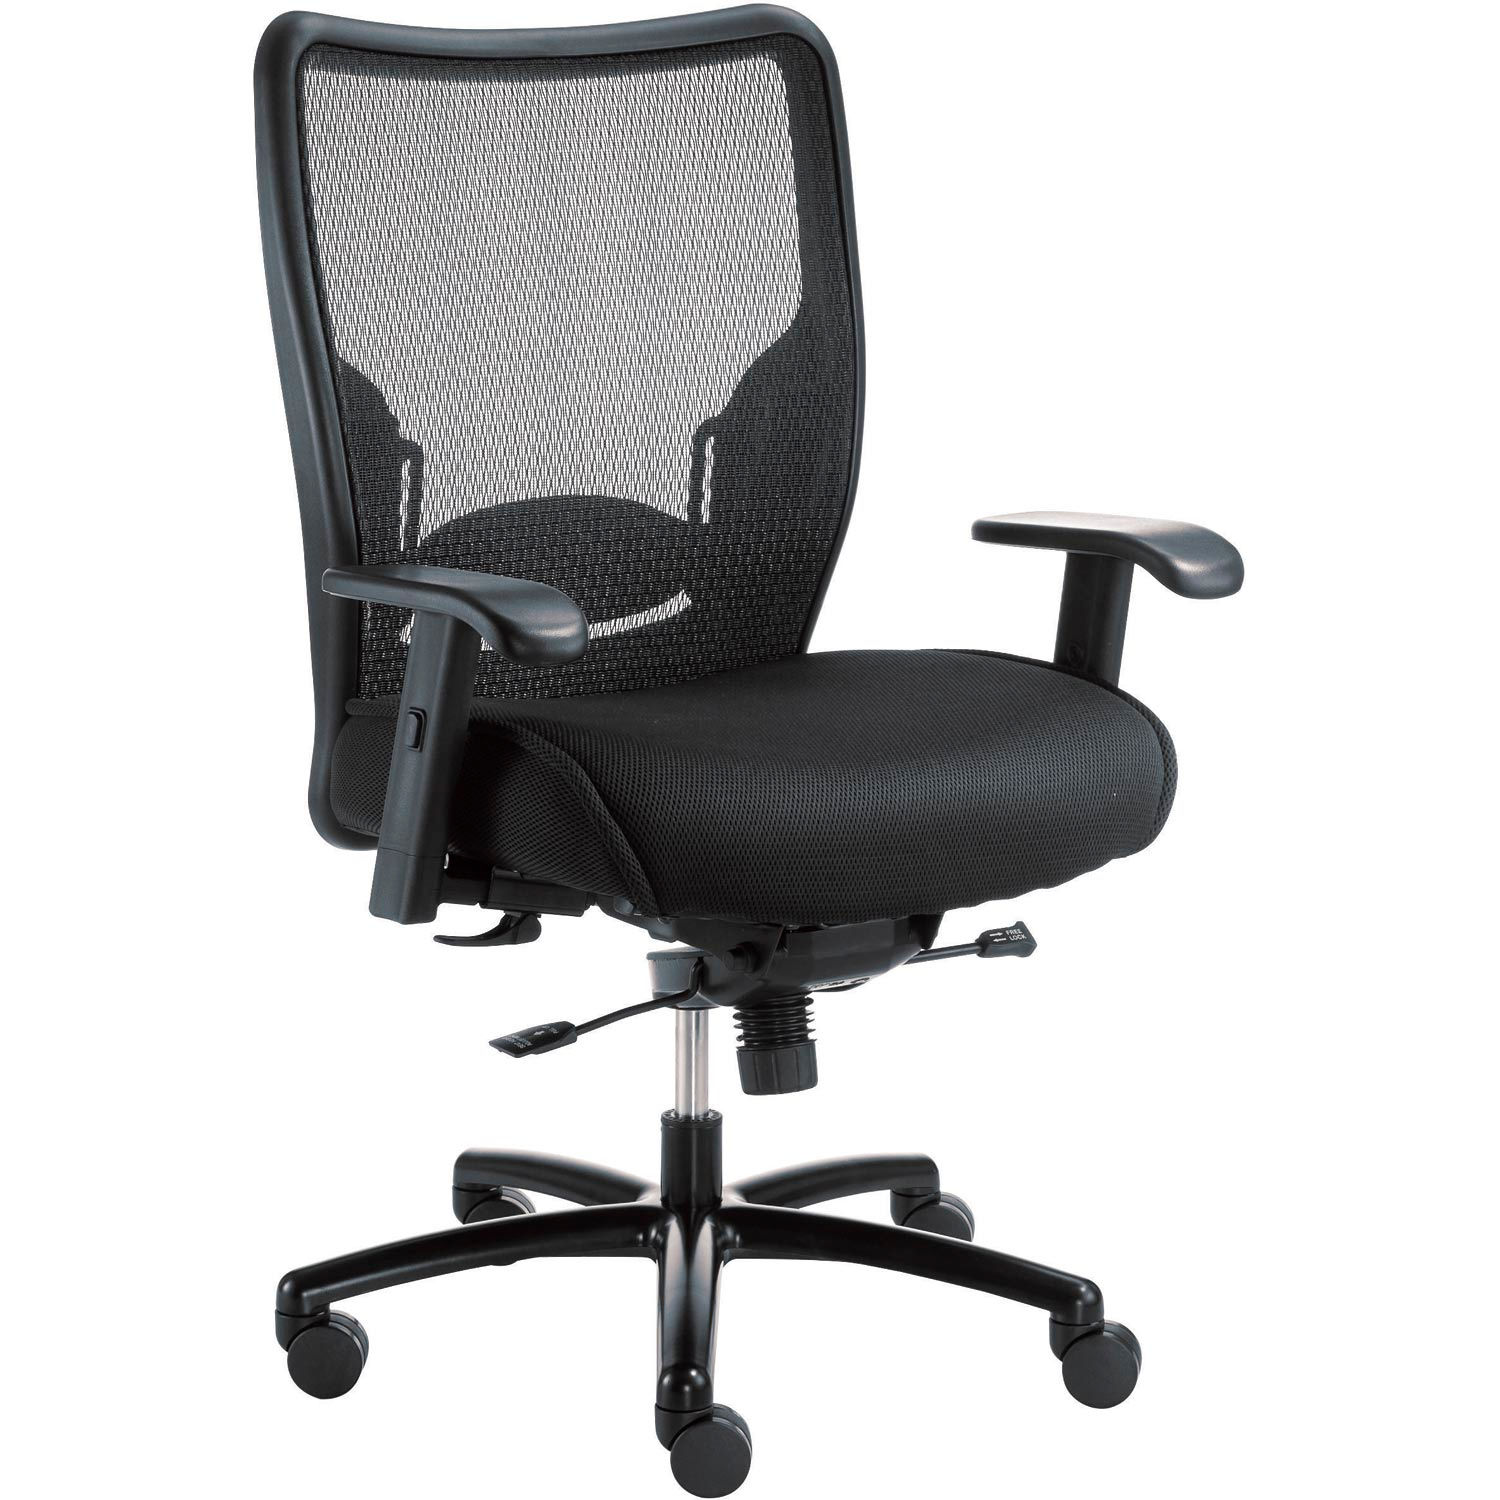 Chairs Big Tall Interion 174 Big And Tall Mesh Office Chair Fabric High Back Black 277514 Globalindustrial Com